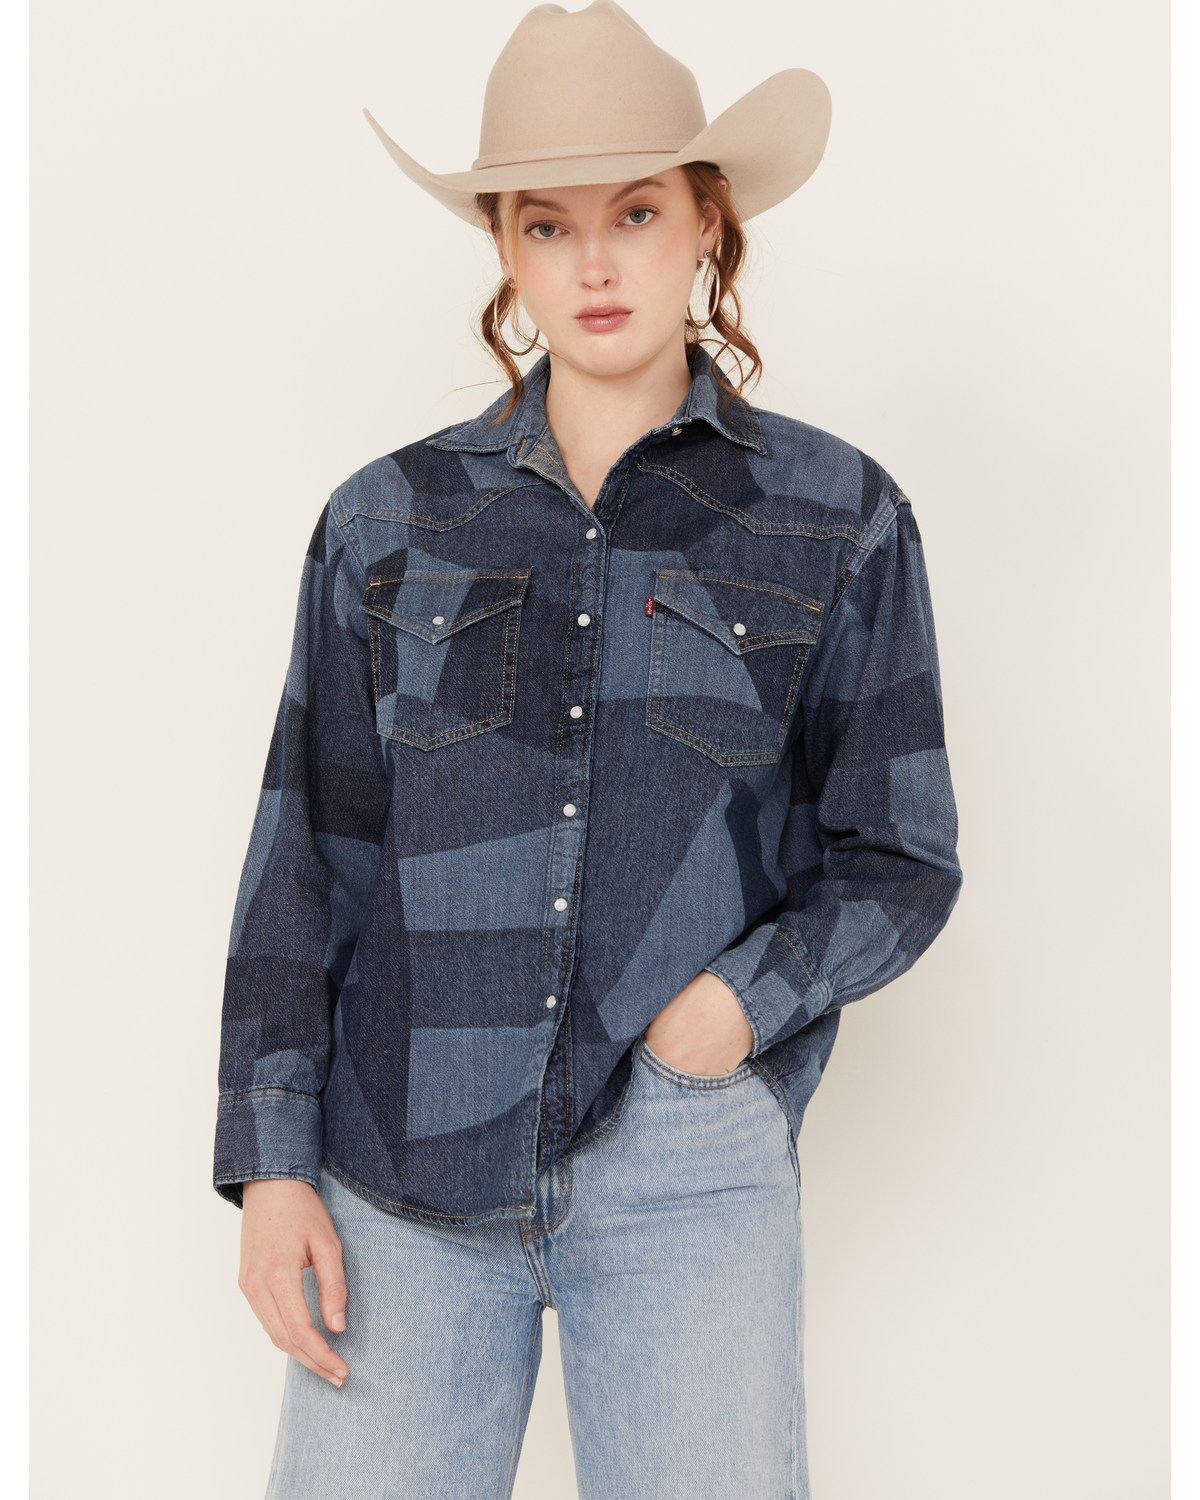 Levi's Women's Dylan Oversized Western Patchwork Print Long Sleeve Pearl Snap Shirt